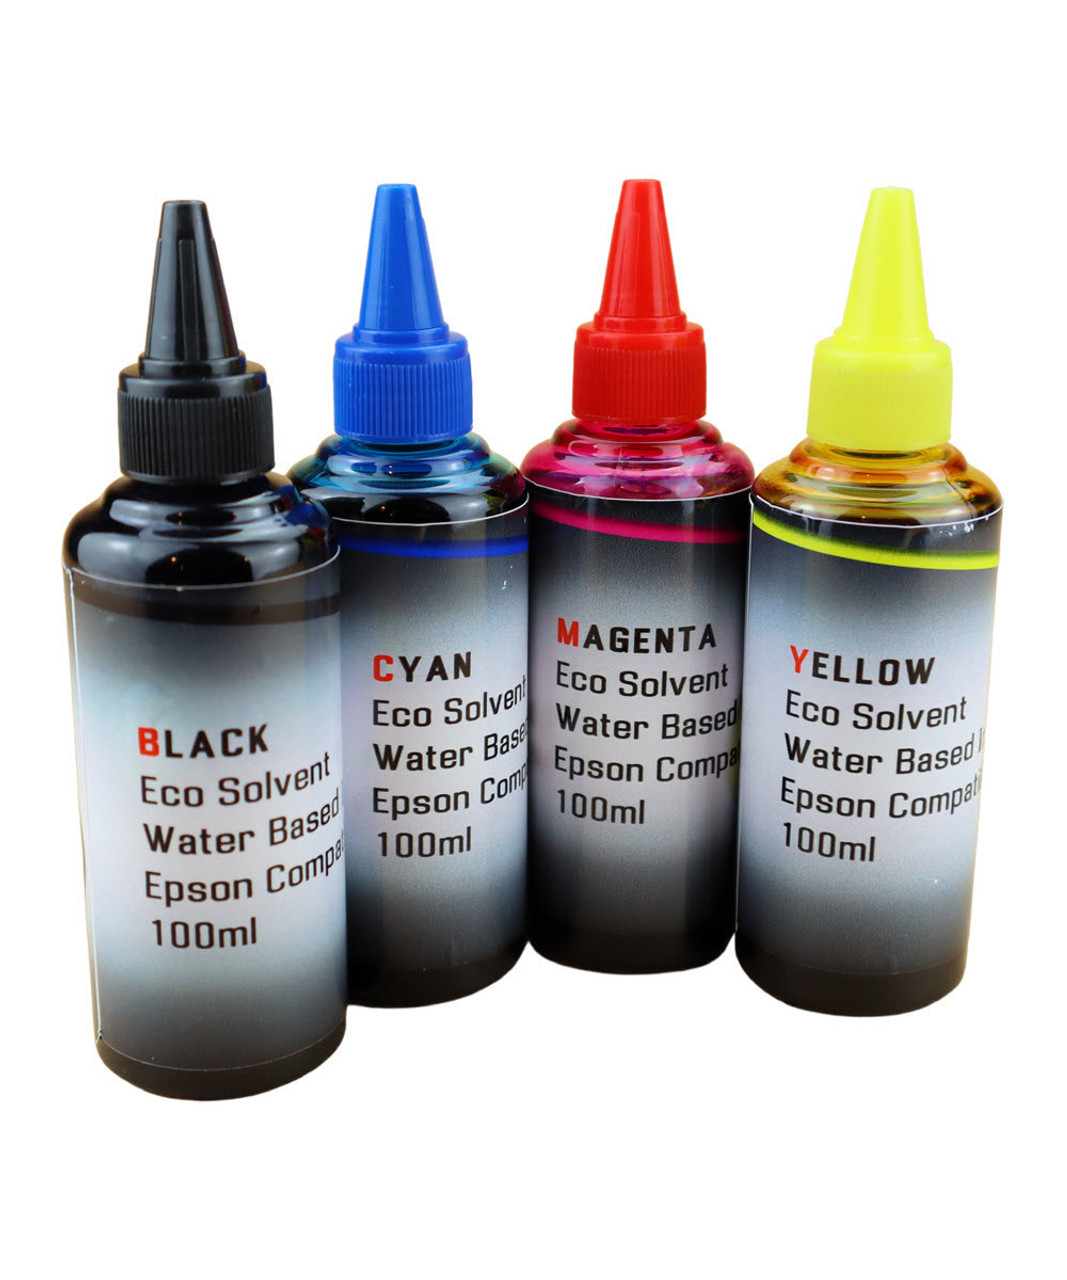 4 Water Based Eco Solvent Ink 100ml Bottle each Color for Epson WorkForce Pro WF-7310, WF-7820, WF-7840 Printers